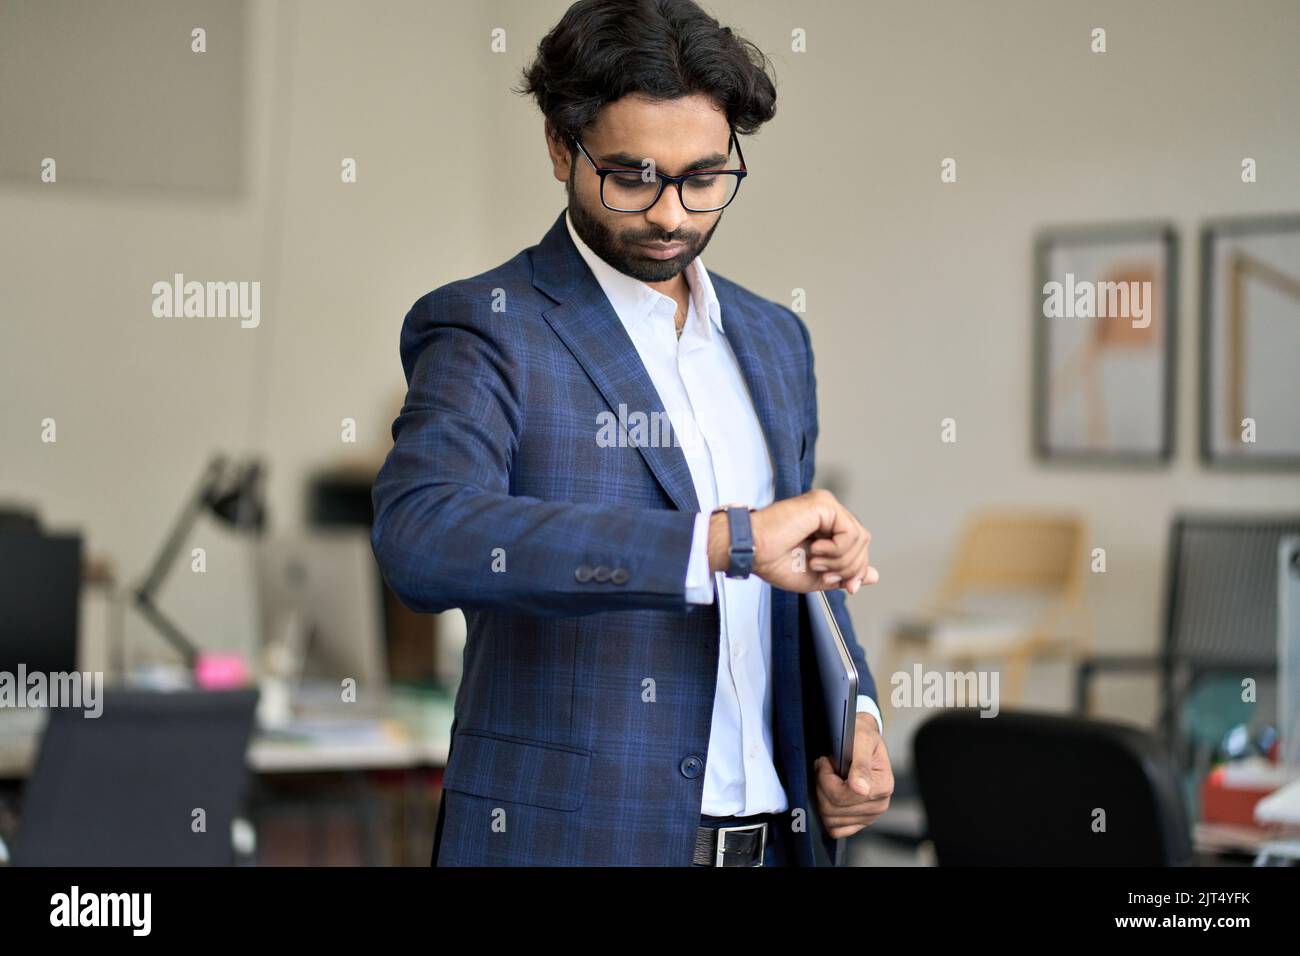 Busy indian business man checking time looking at watch in office. Stock Photo